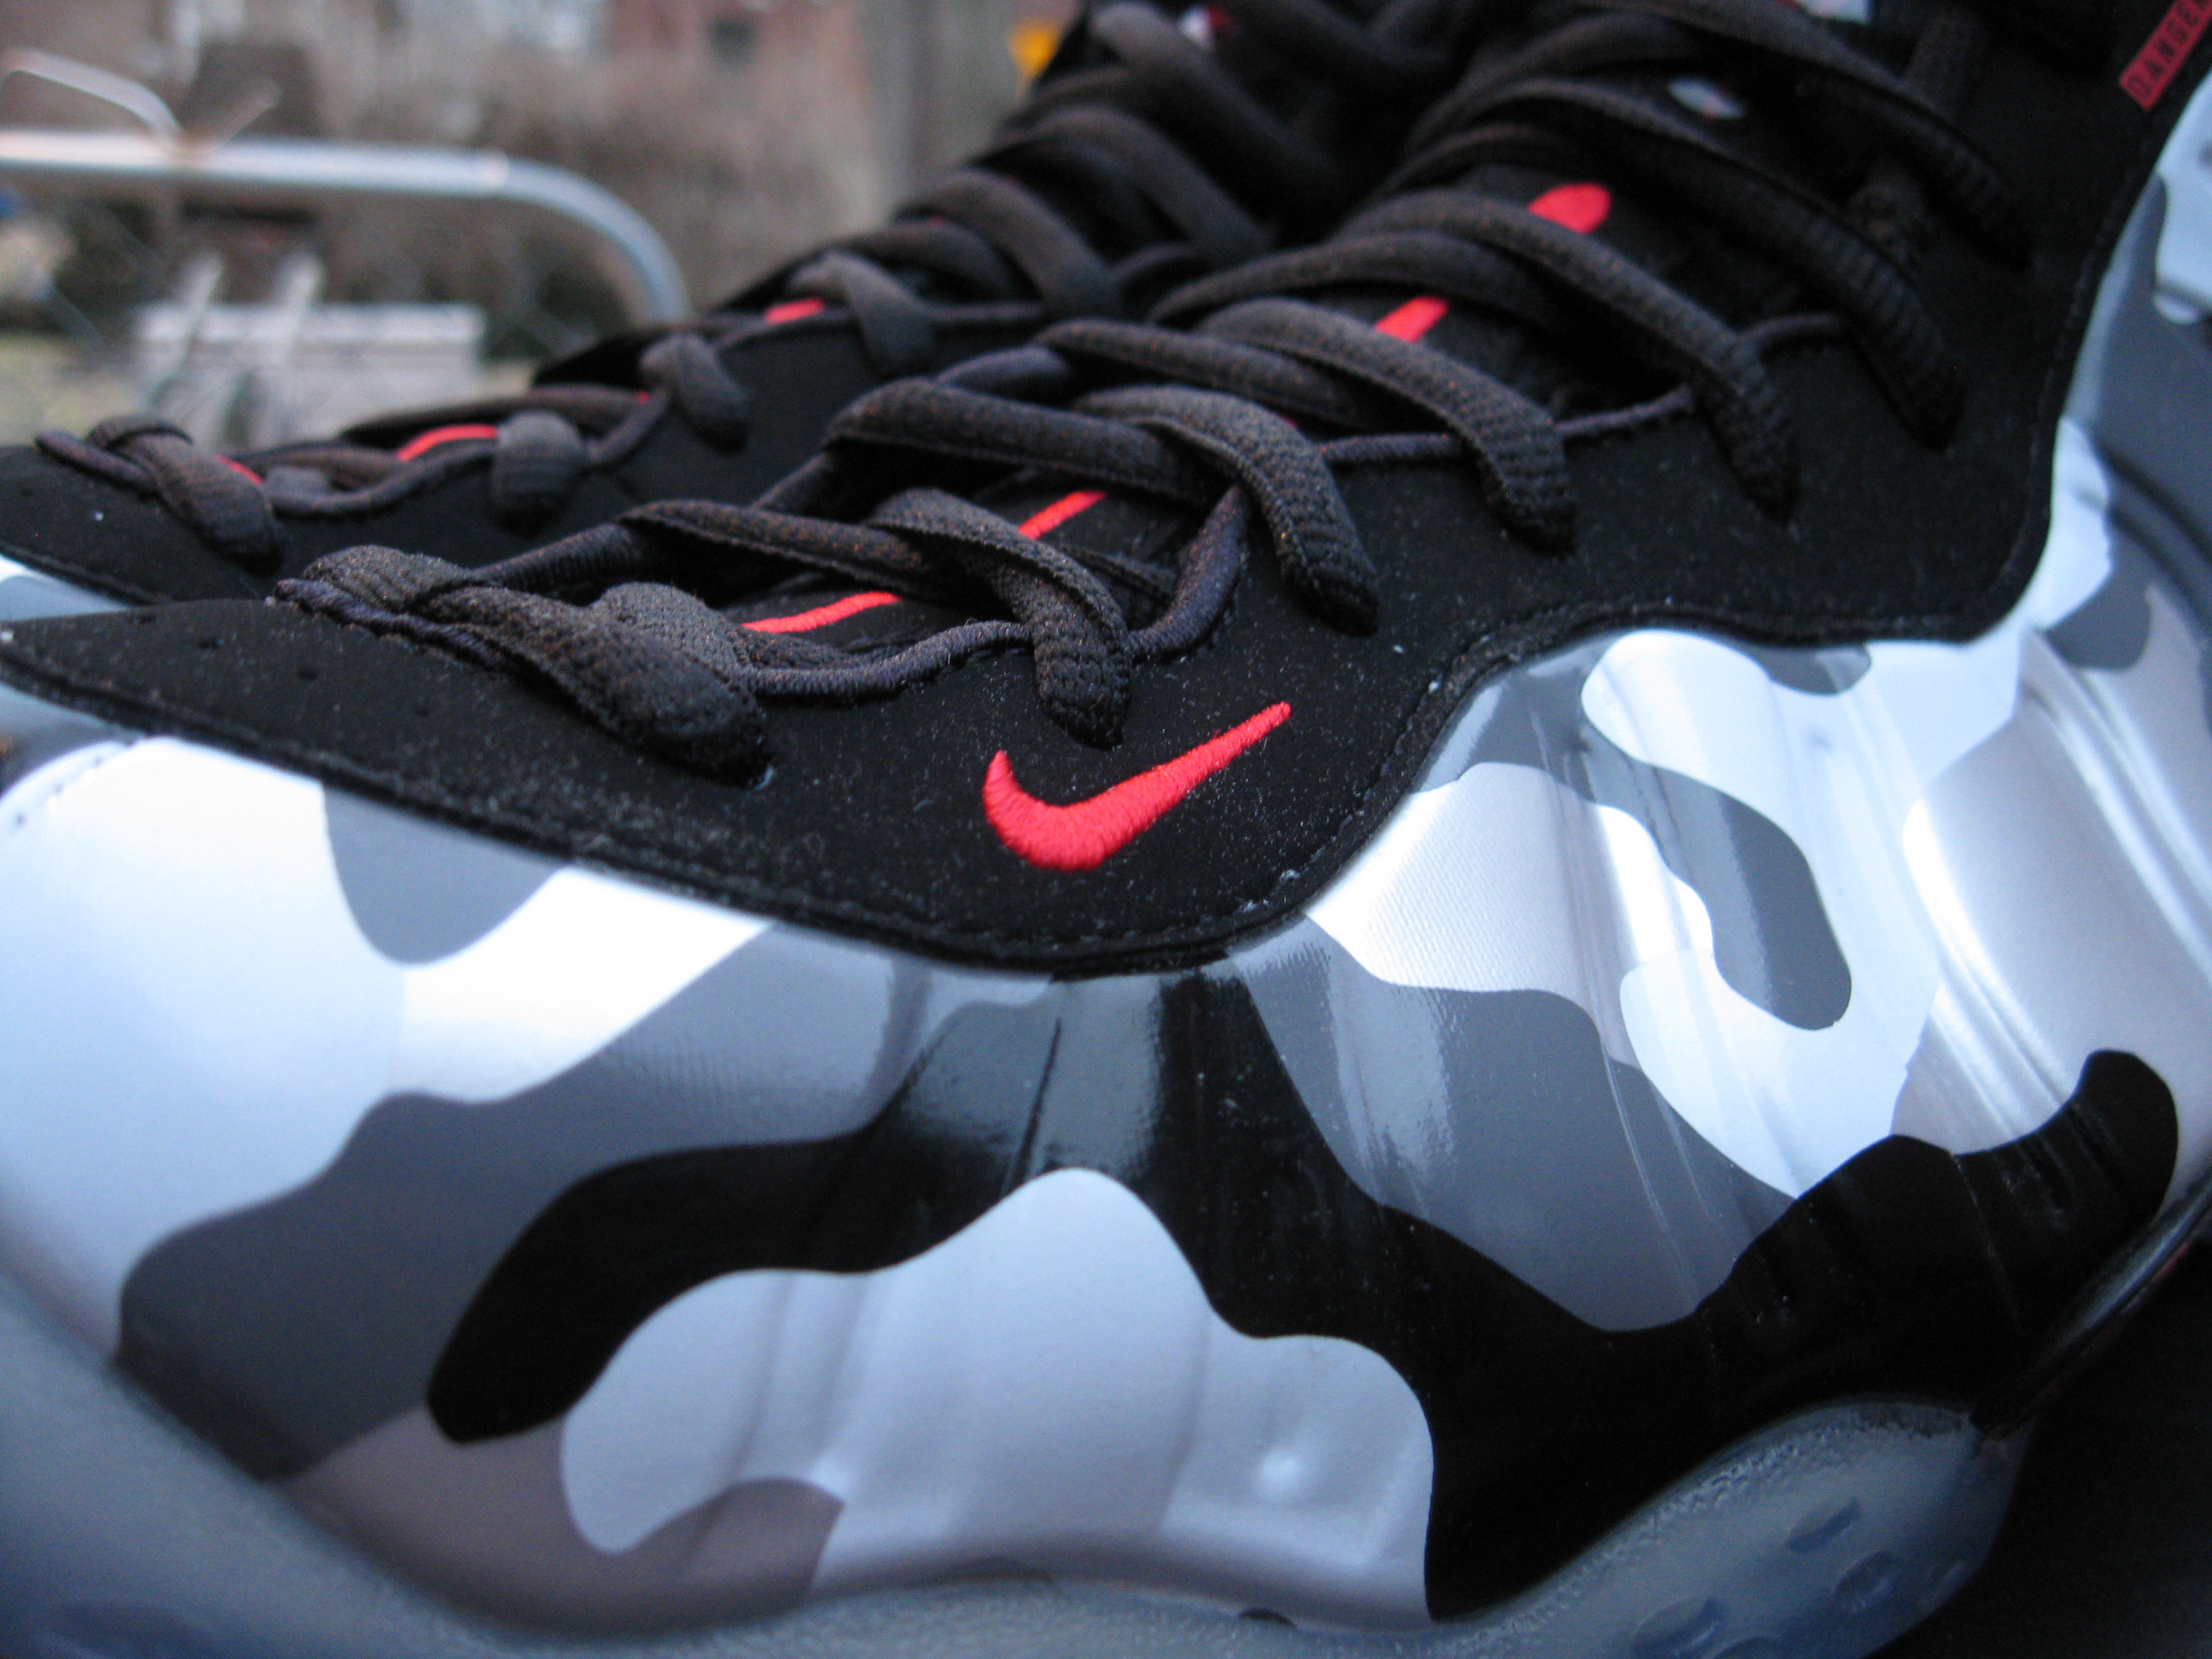 Nike Air Foamposite “Fighter Jet” and 